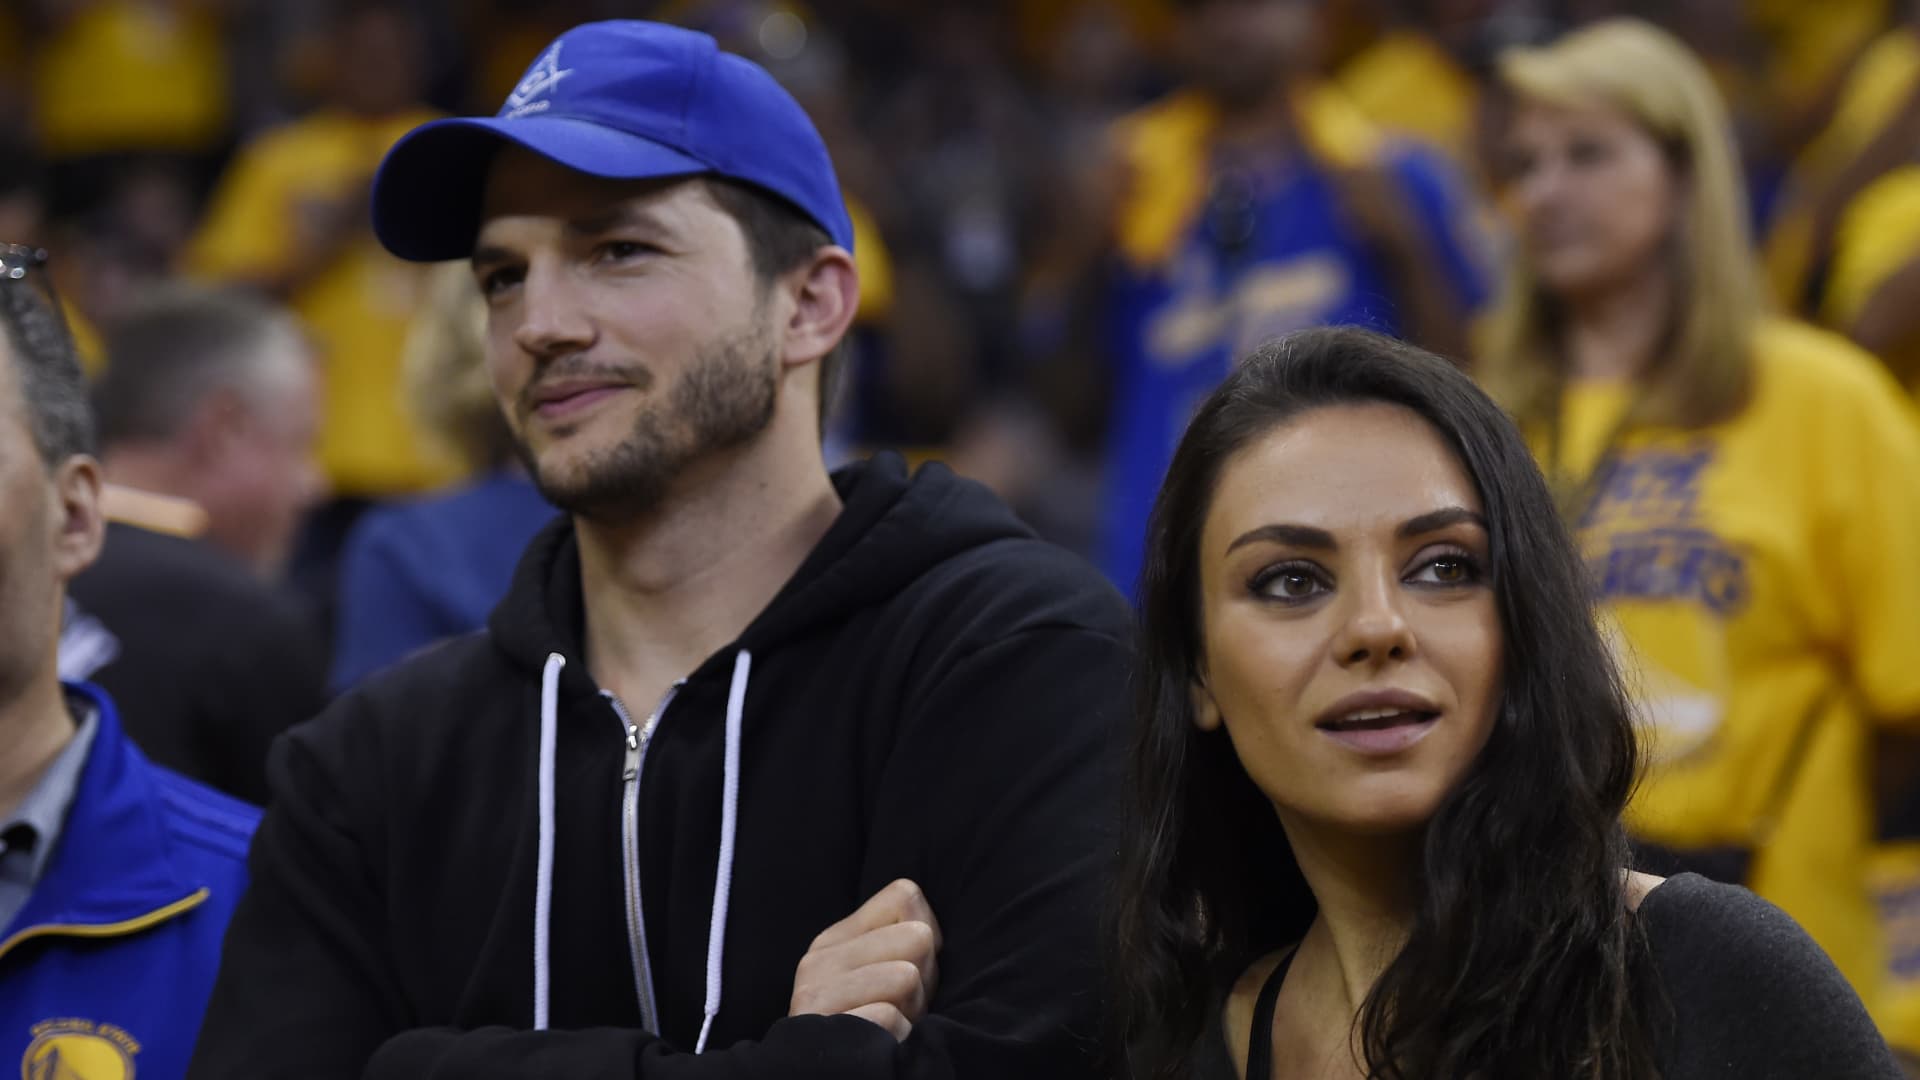 Mila Kunis stands with her husband Ashton Kutcher before Game 2 of the NBA Finals at Oracle Arena in Oakland, Calif., on Sunday, June 5, 2016.